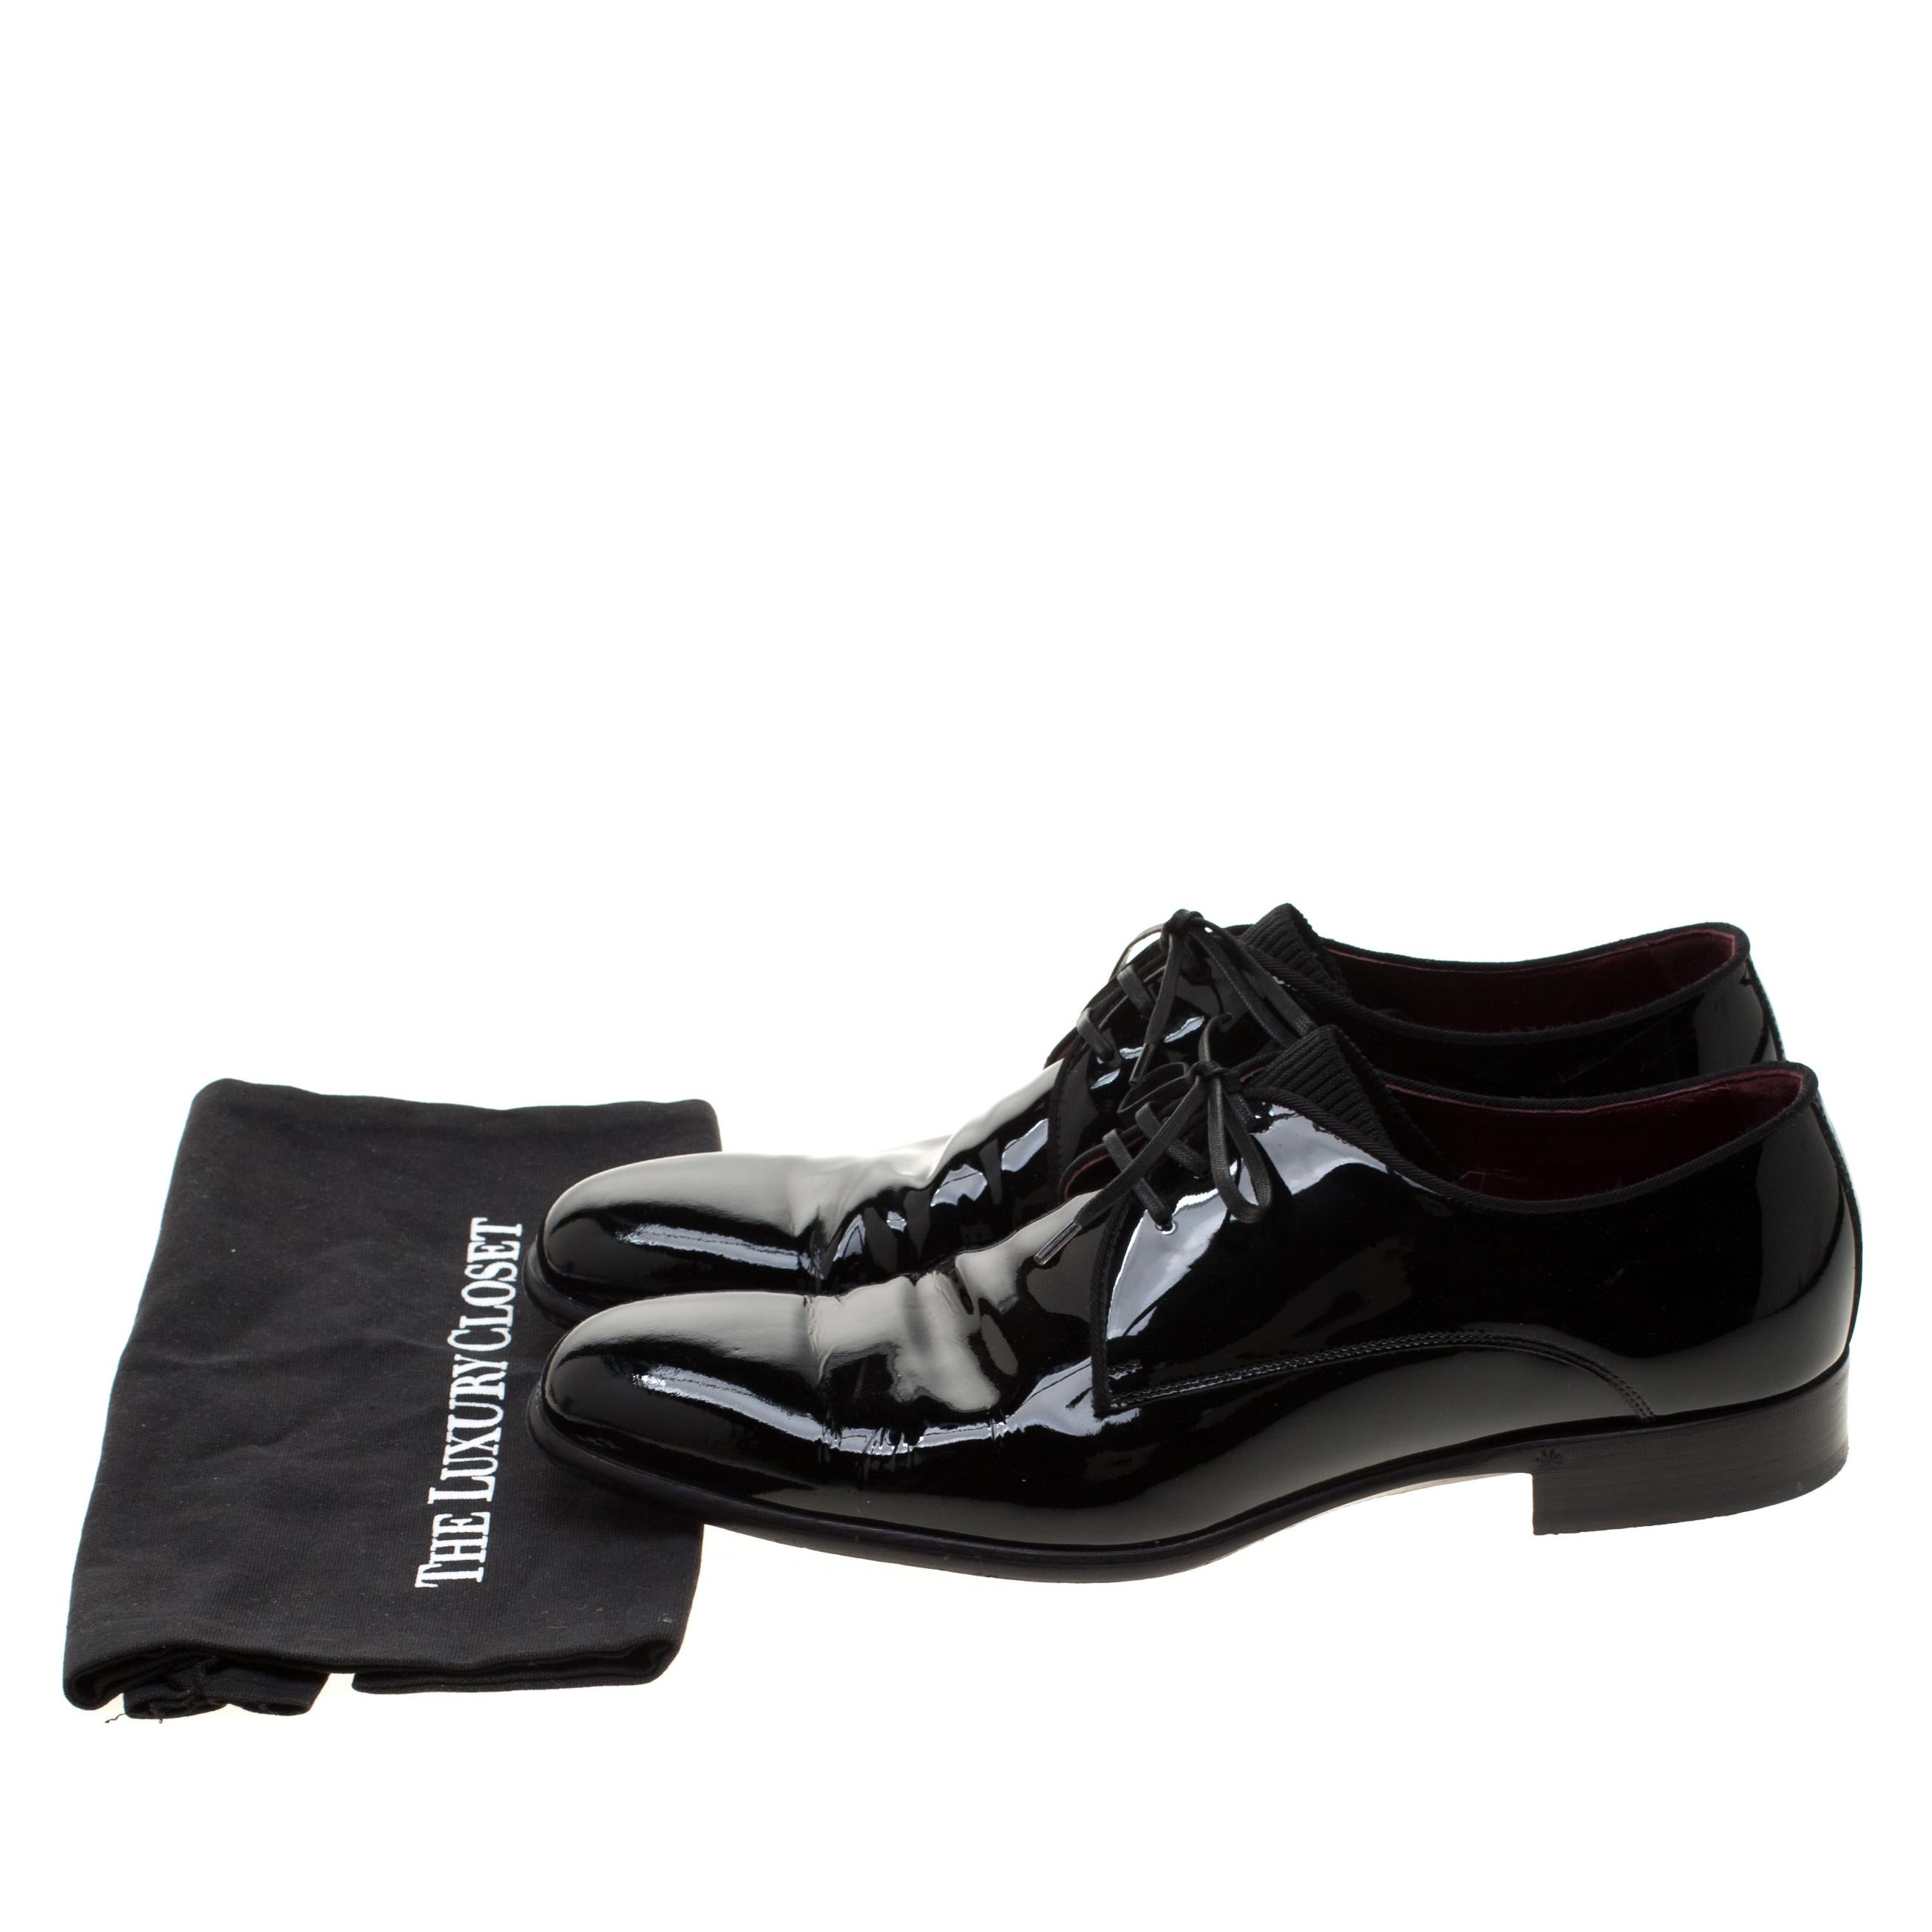 Dolce and Gabbana Black Patent Leather Derby Oxford Shoes Size 43 2